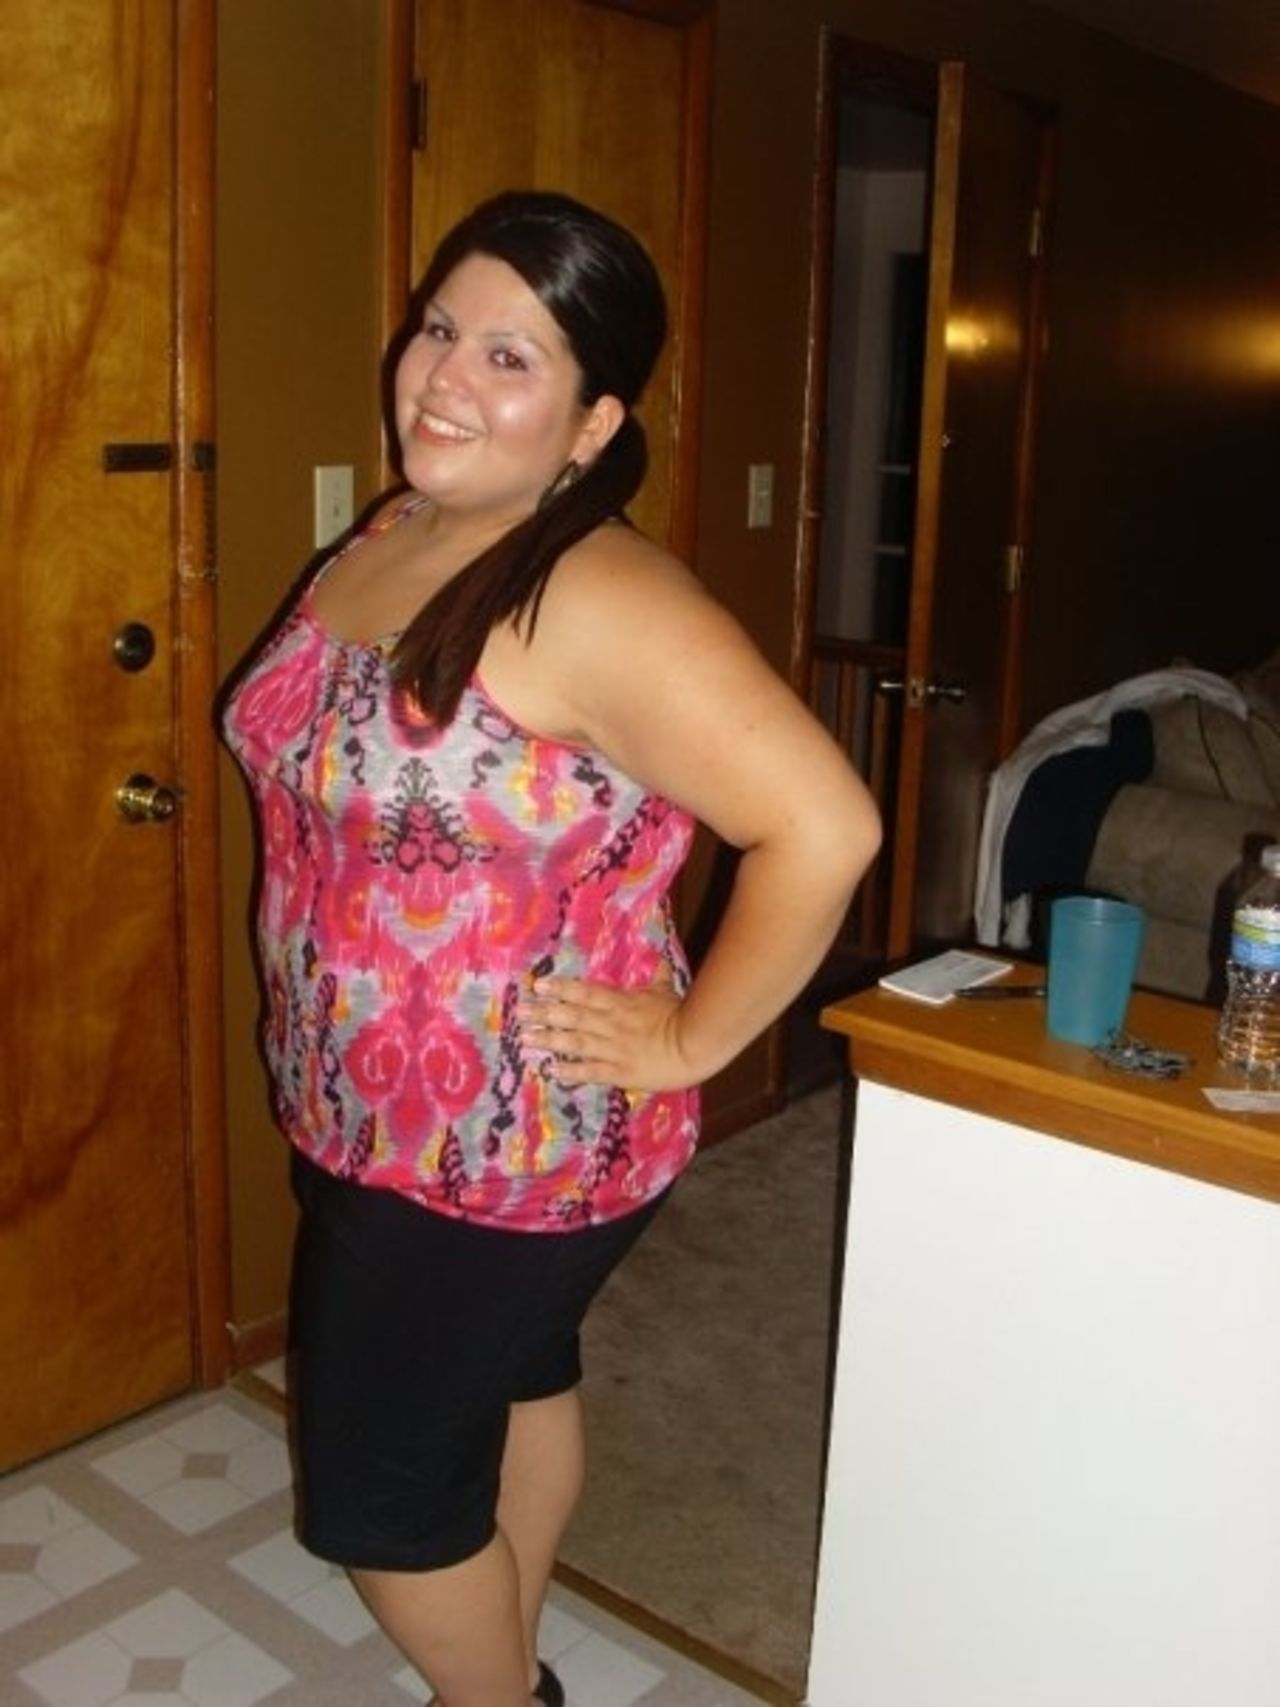 Brittni Garcia began her weight loss journey in 2009 at 235 pounds.